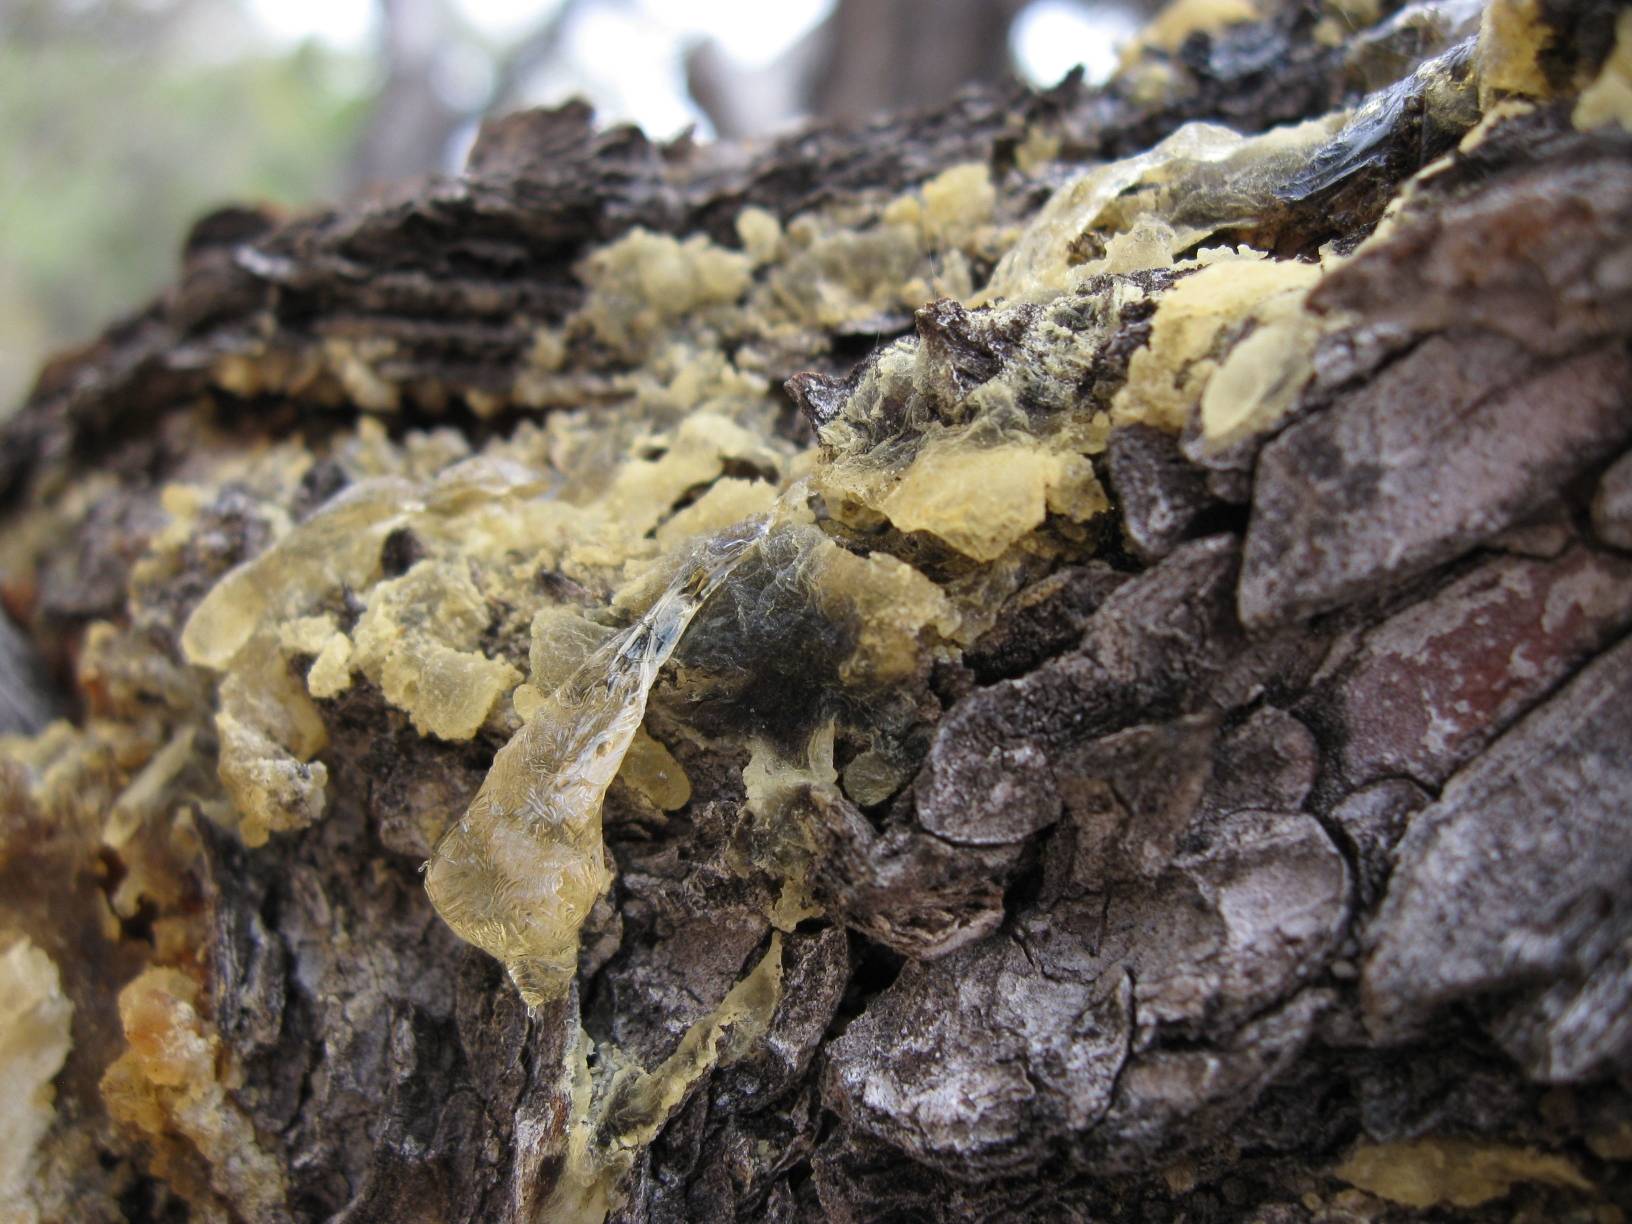 Image: The bark and sap of the pinyon pine. Pinyon-juniper forests extend on both the North and South rims of the Grand Canyon.